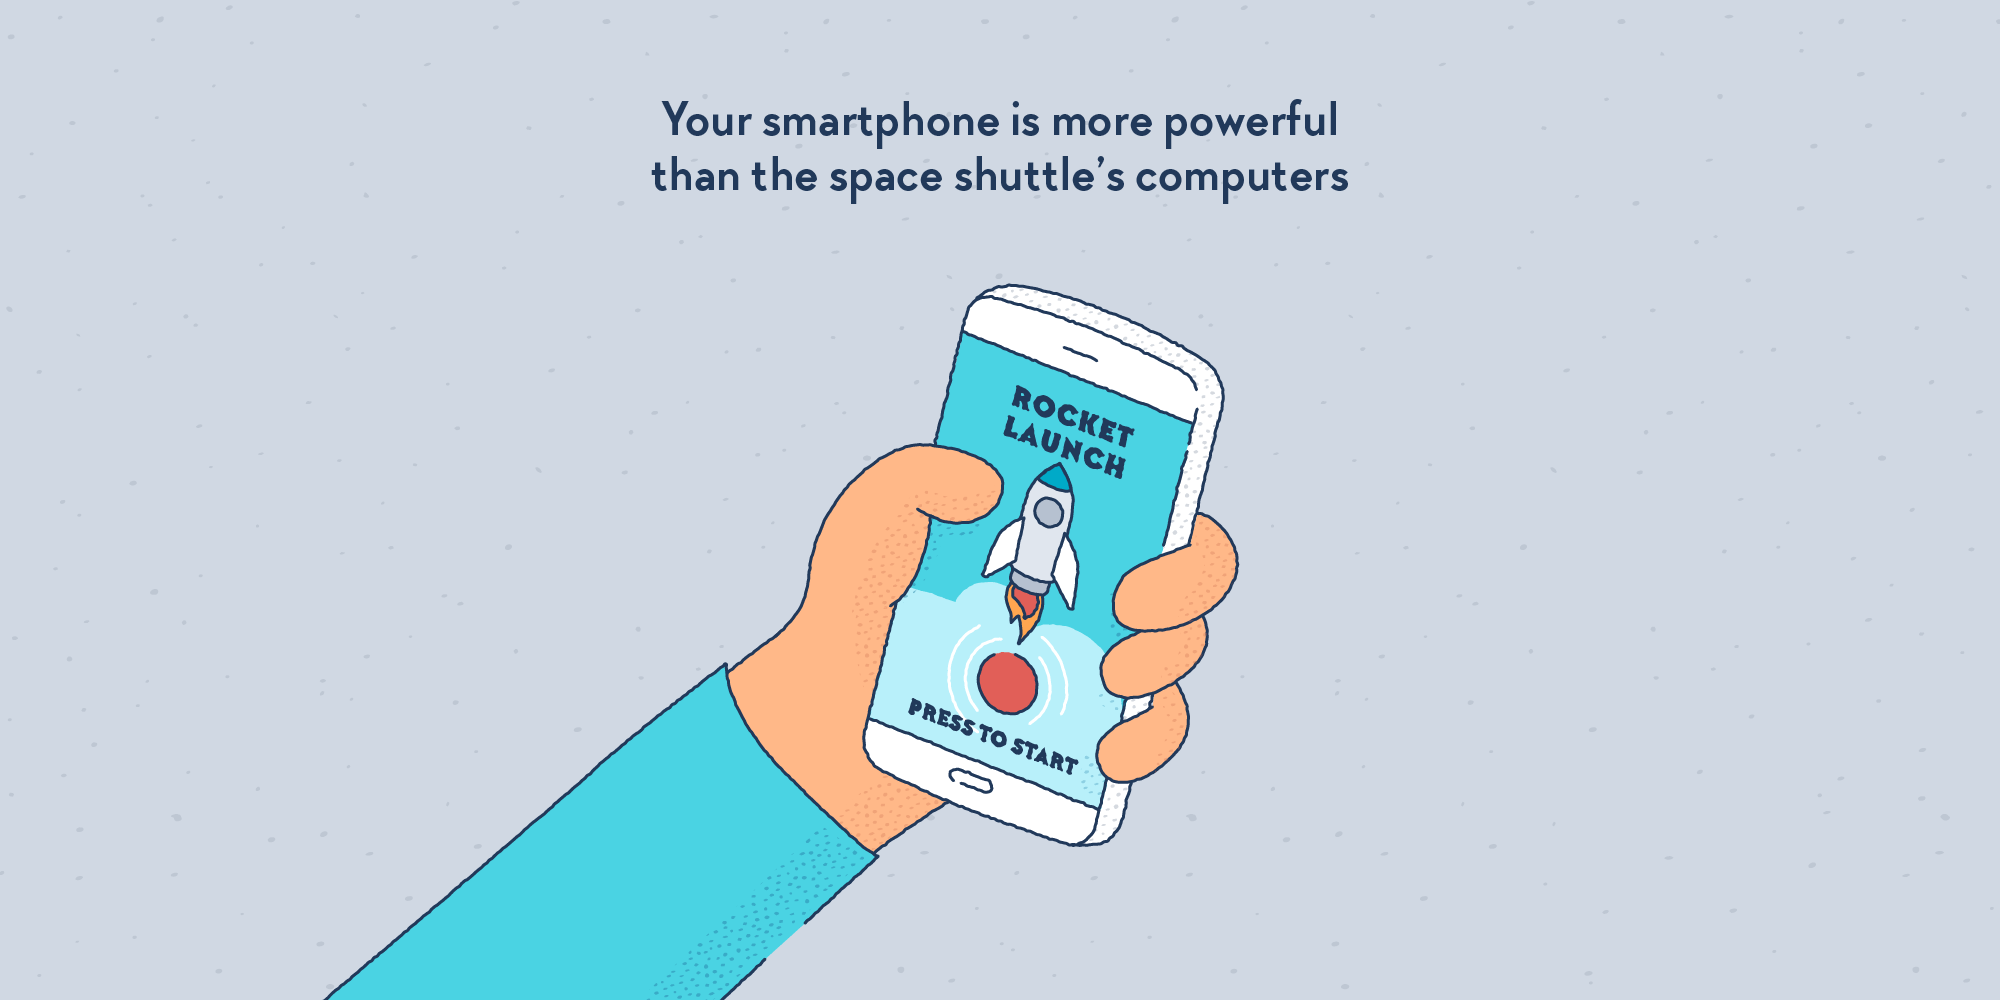 A hand holding a smartphone with a “Rocket Launch” app open on the screen.